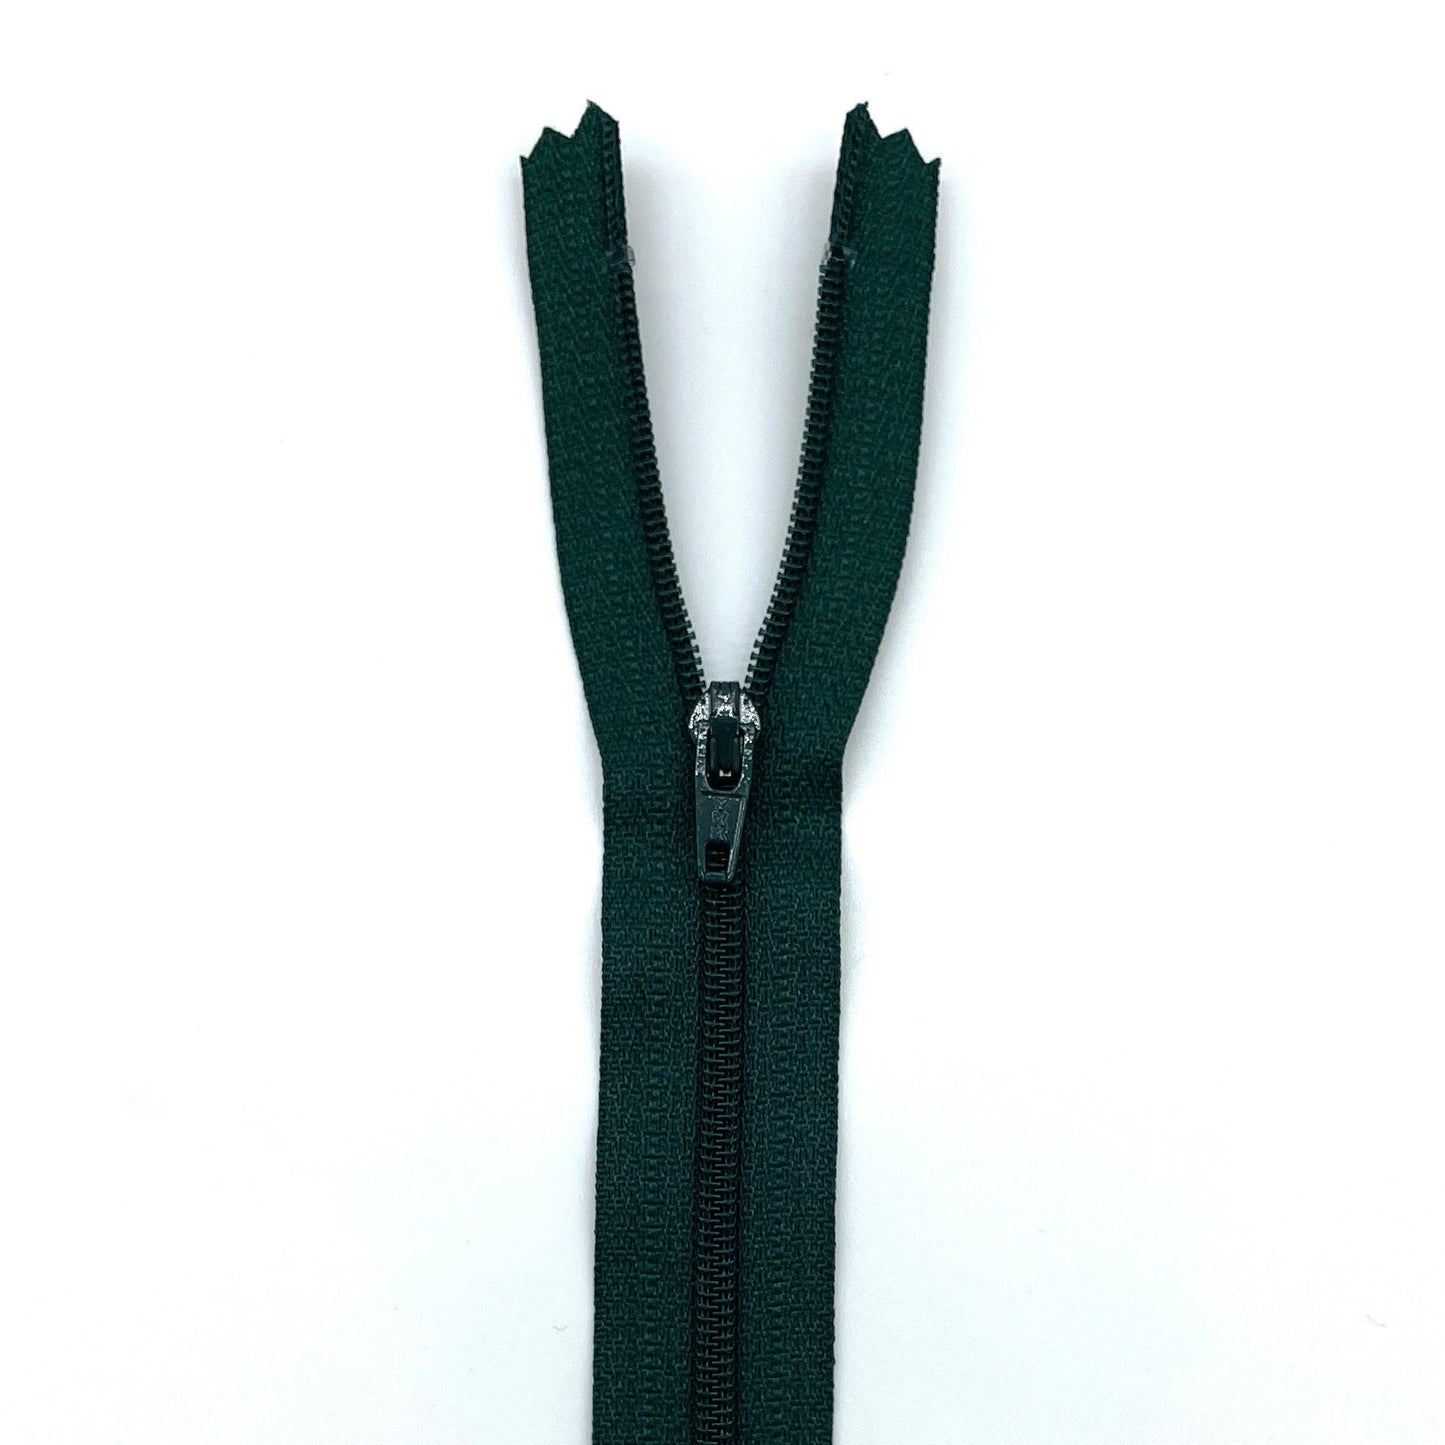 Dress Zippers (up to 56cm/22")